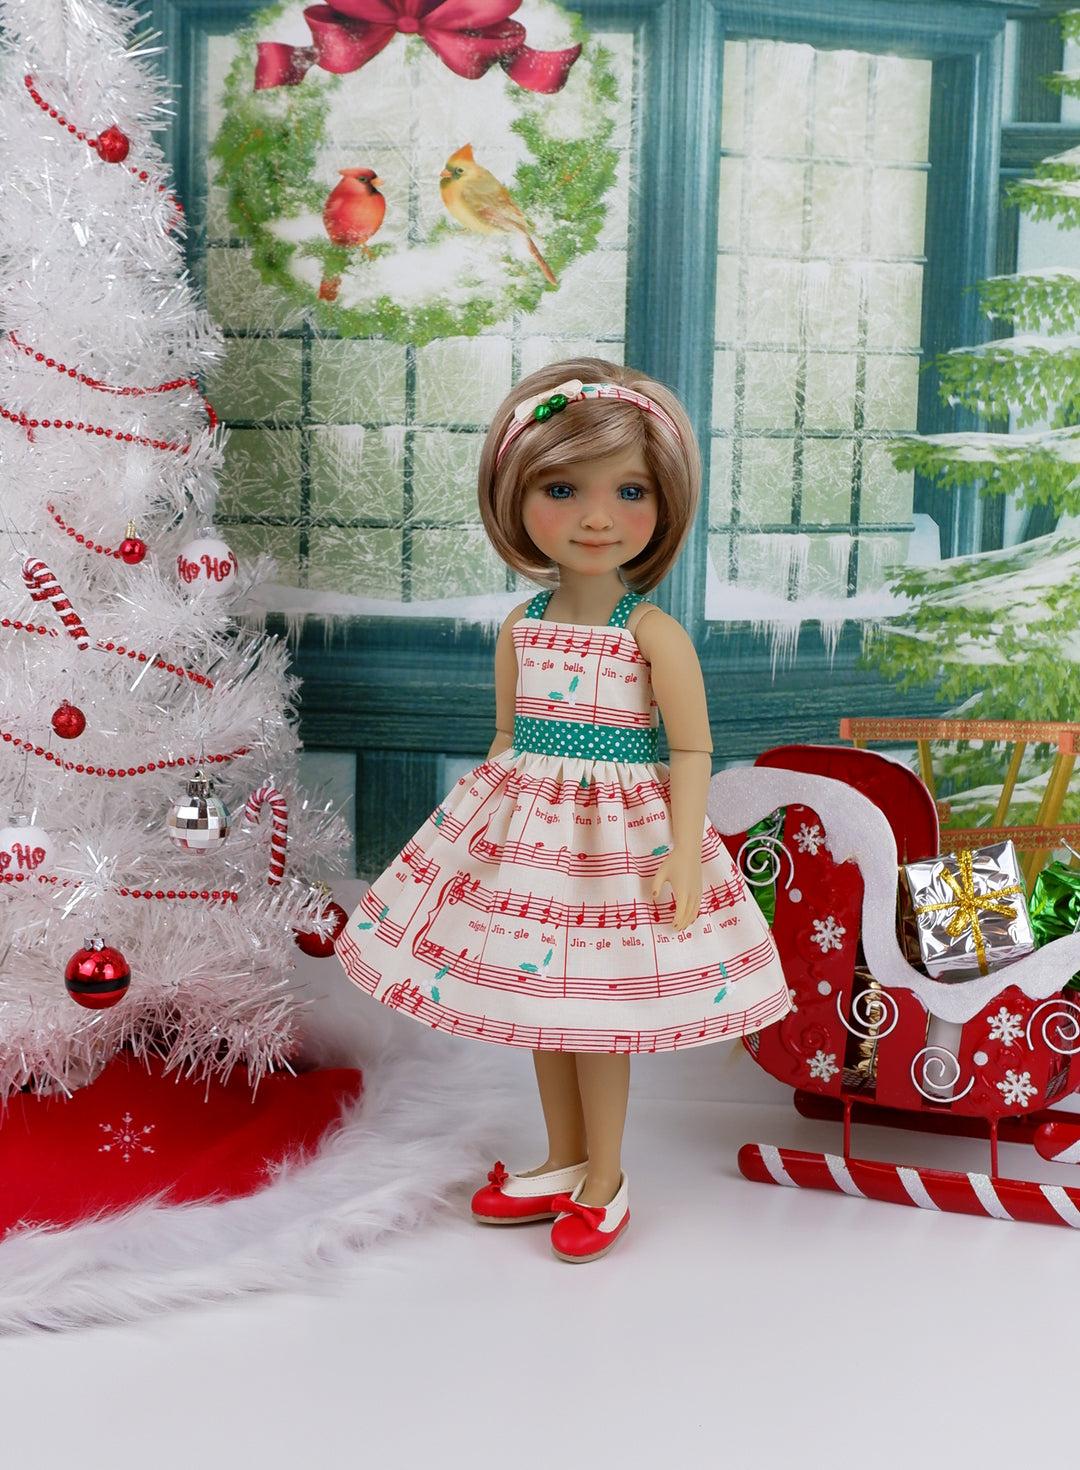 Jingle Tune - dress & sweater with shoes for Ruby Red Fashion Friends doll